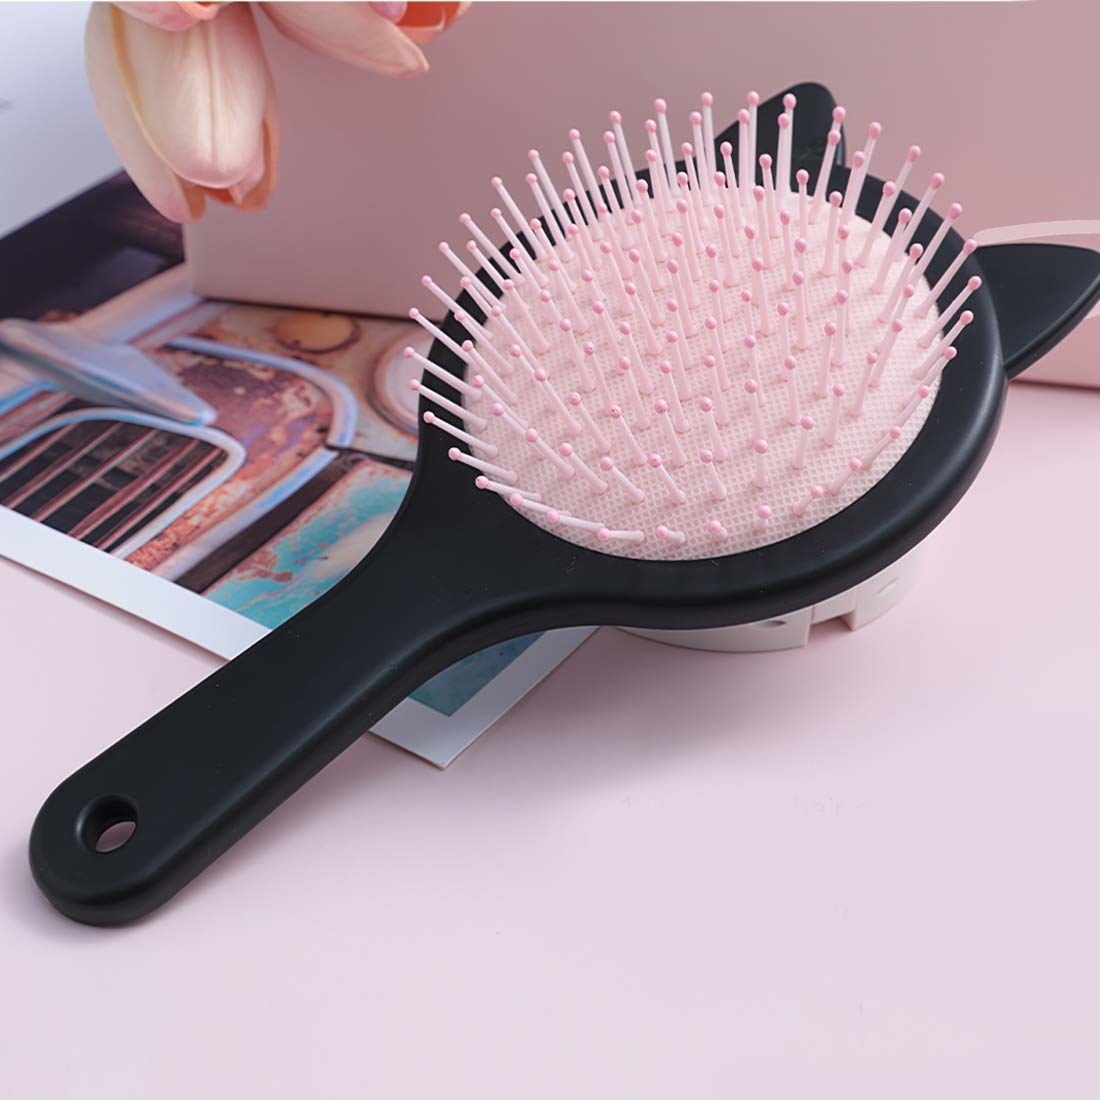 A pink detangling hair brush with a black handle and cat ears